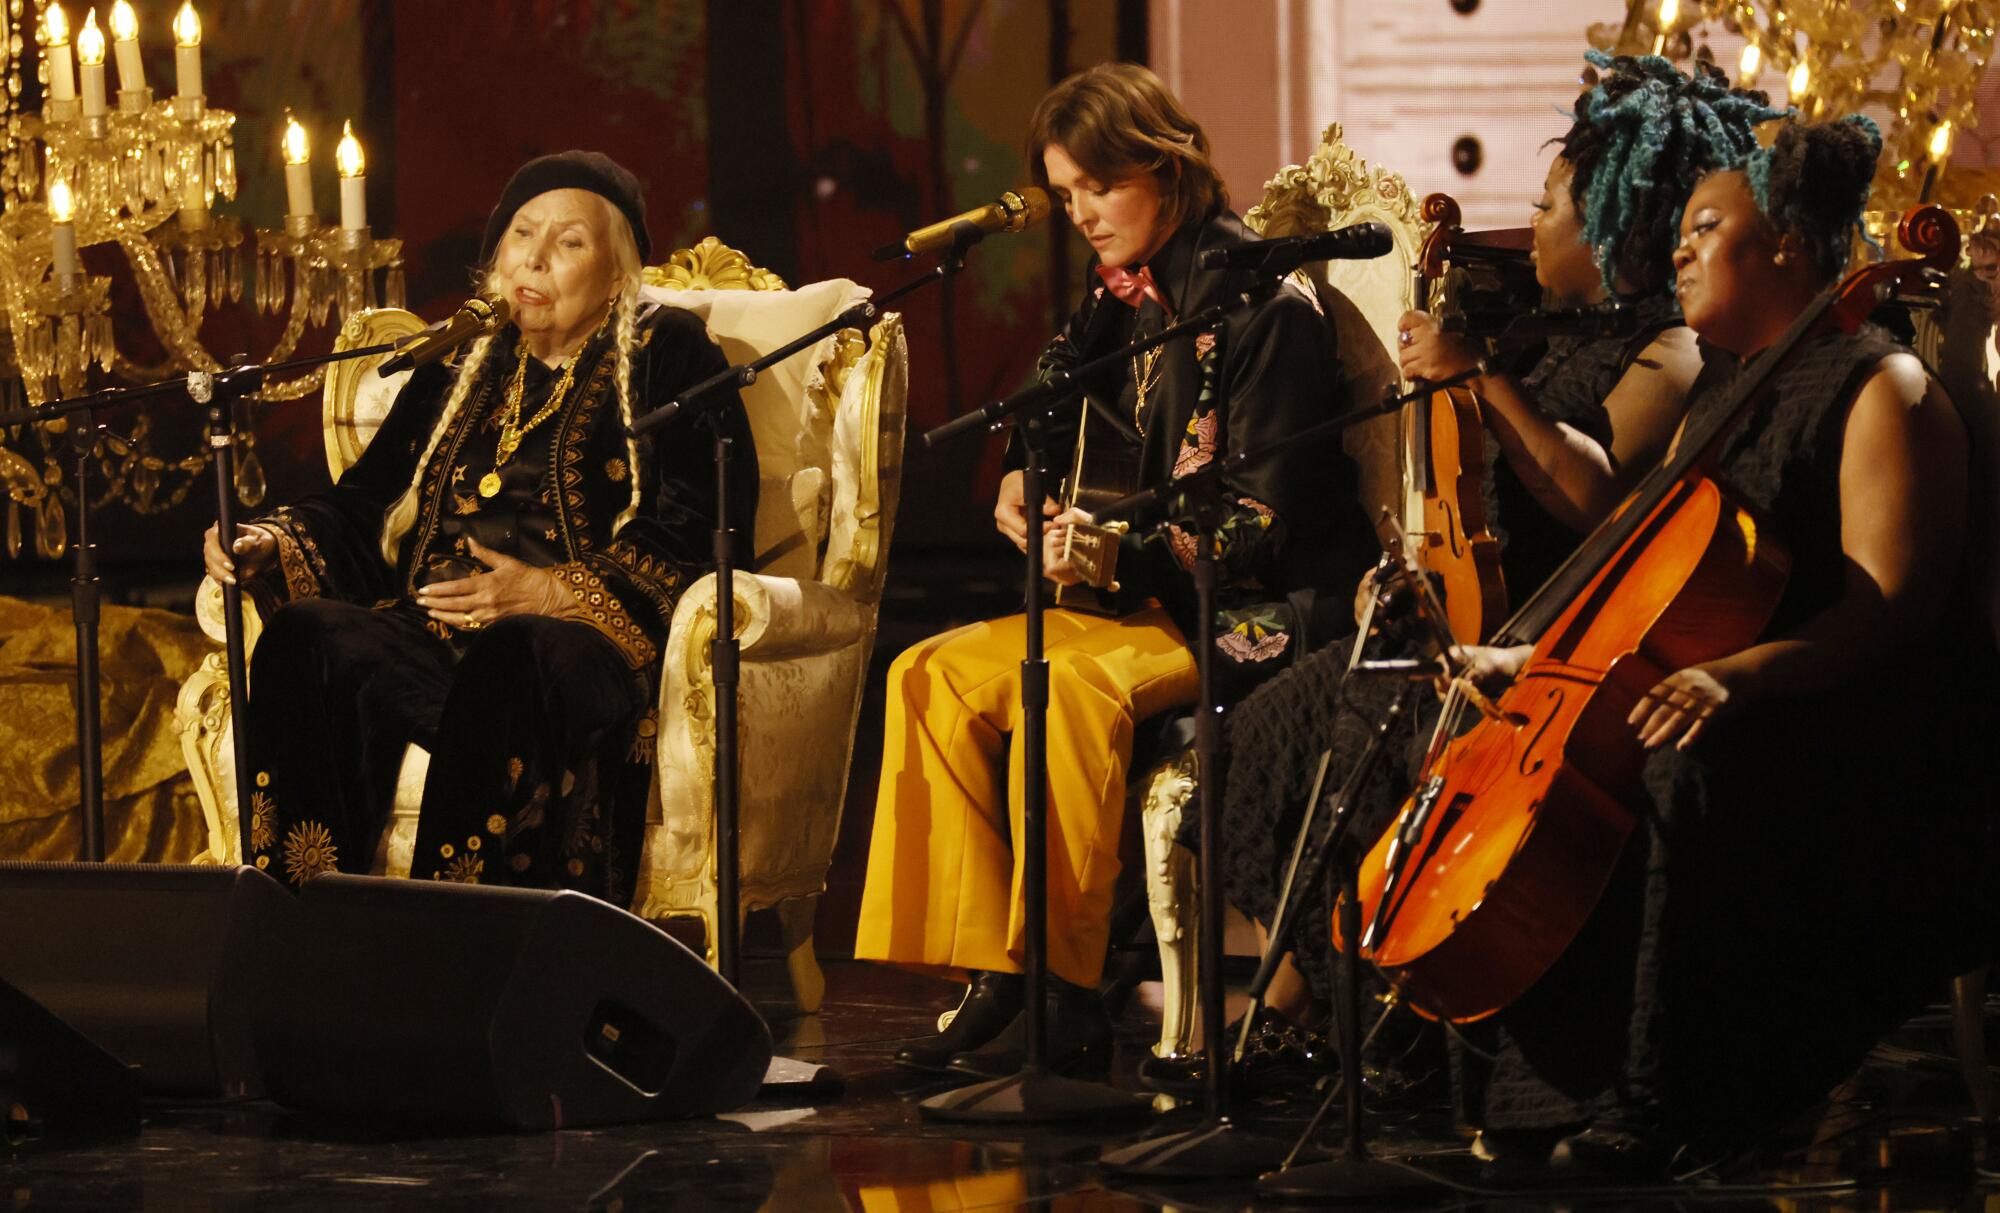 Joni Mitchell and friends perform "Both Sides Now" at the 66th Grammy Awards.